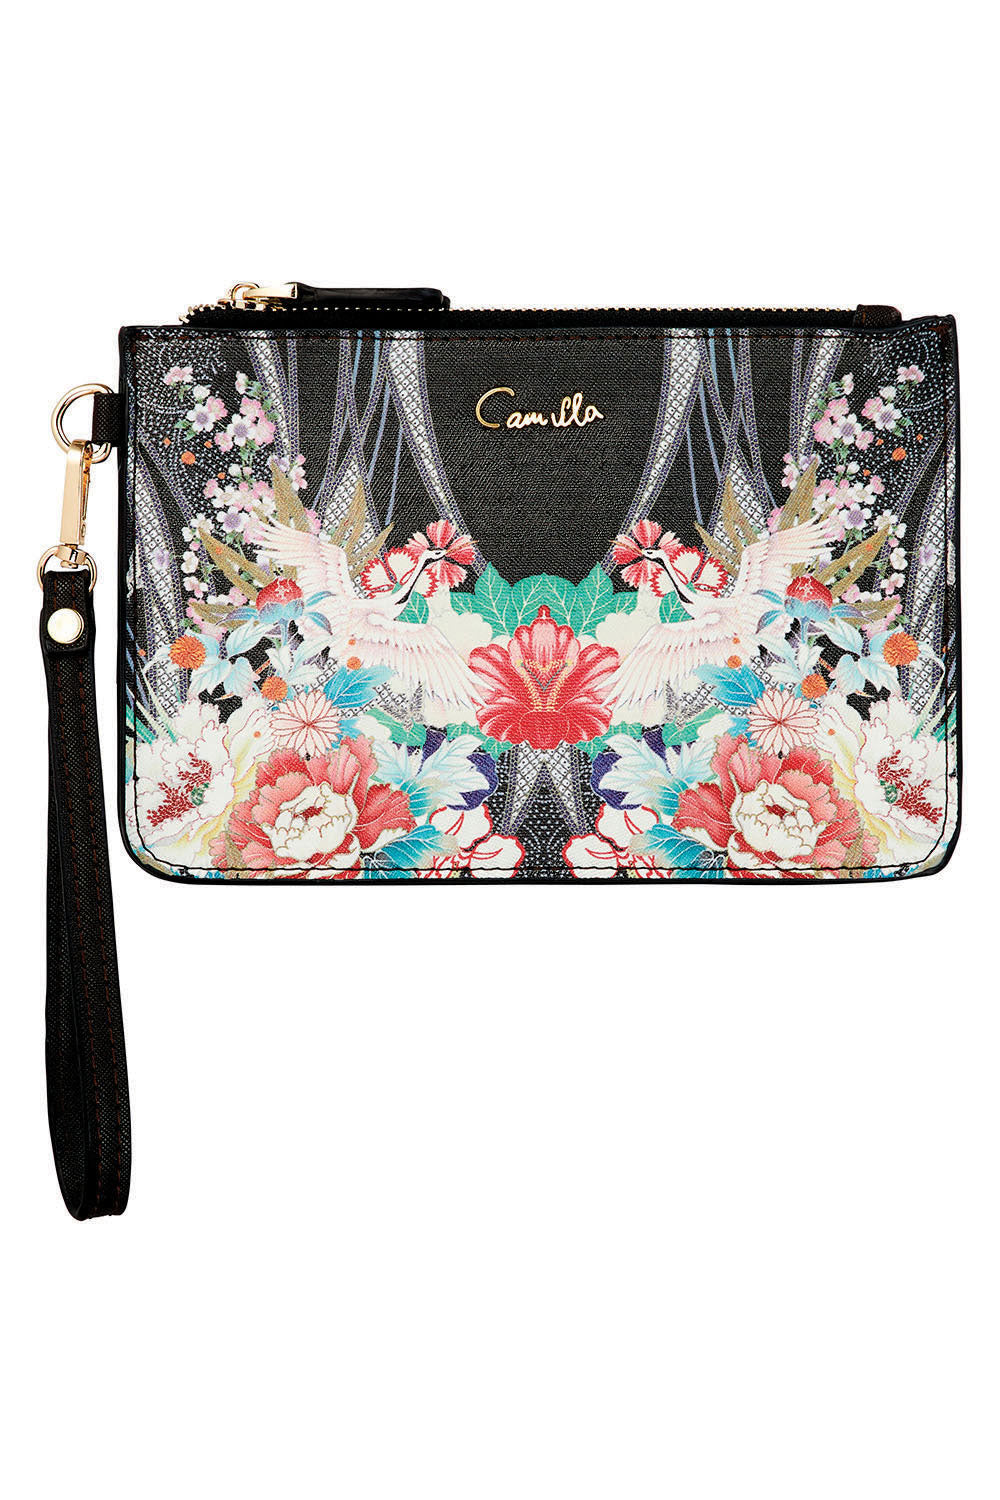 CAMILLA QUEEN OF KINGS TWIN PURSE